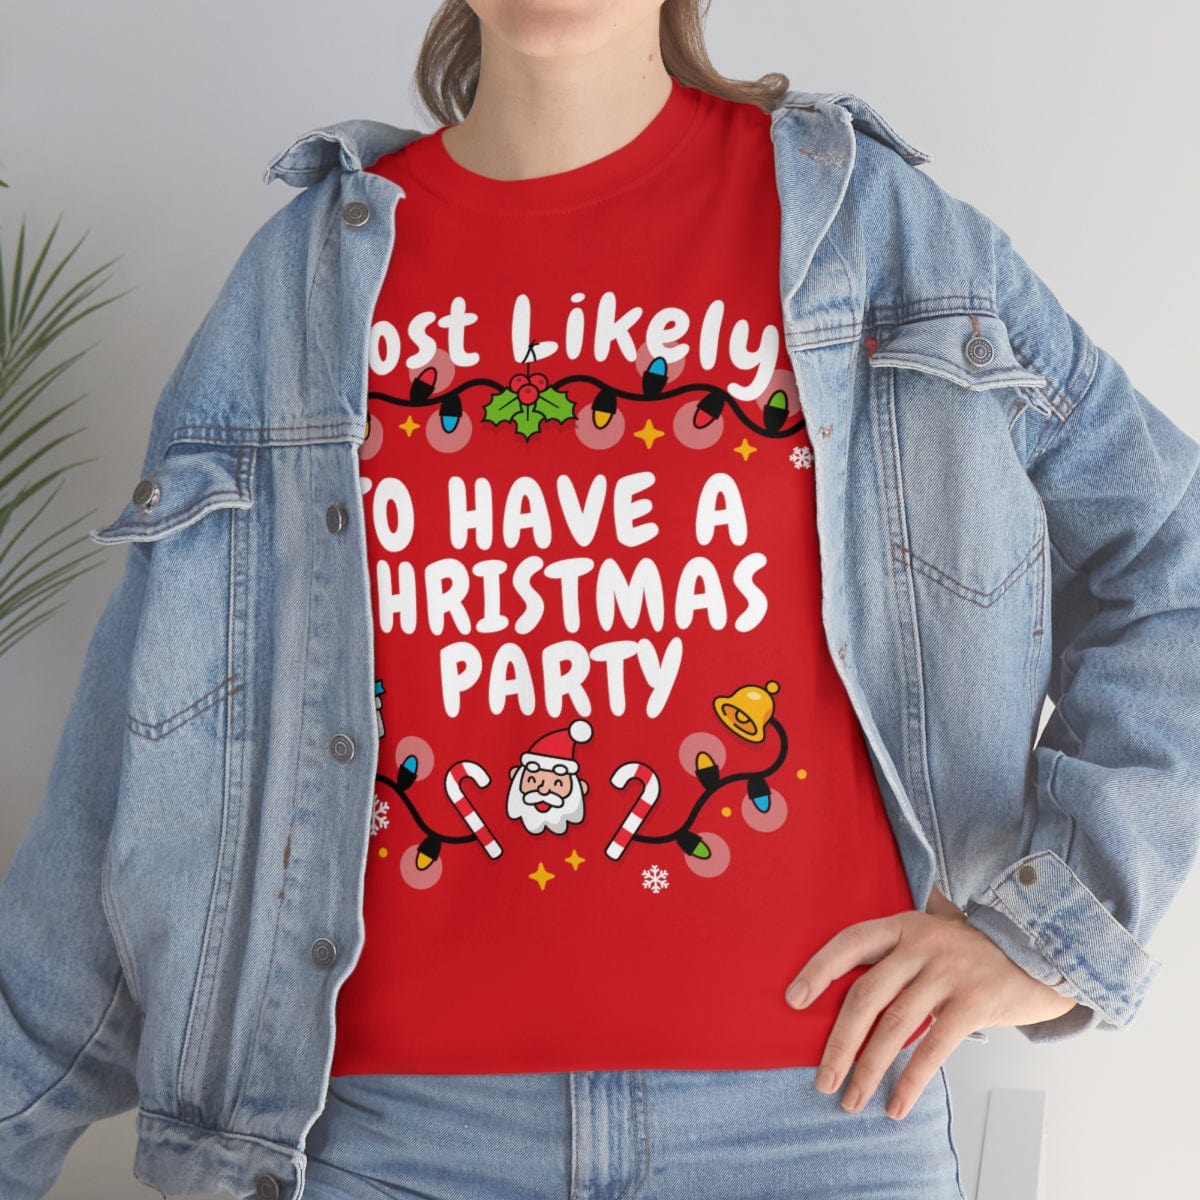 TO HAVE A CHRISTMAS PARTY